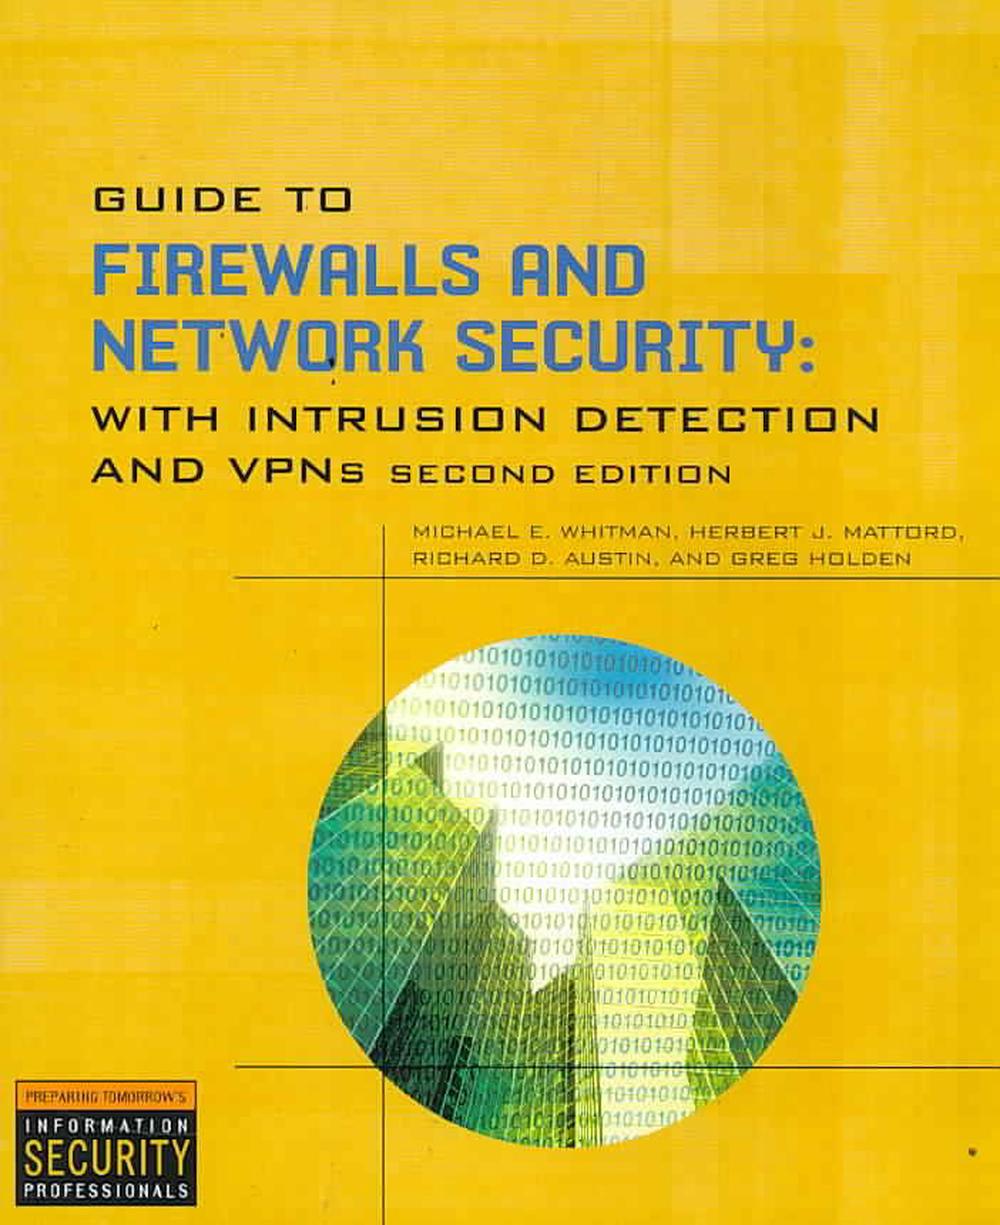 network security firewalls and vpns pdf viewer